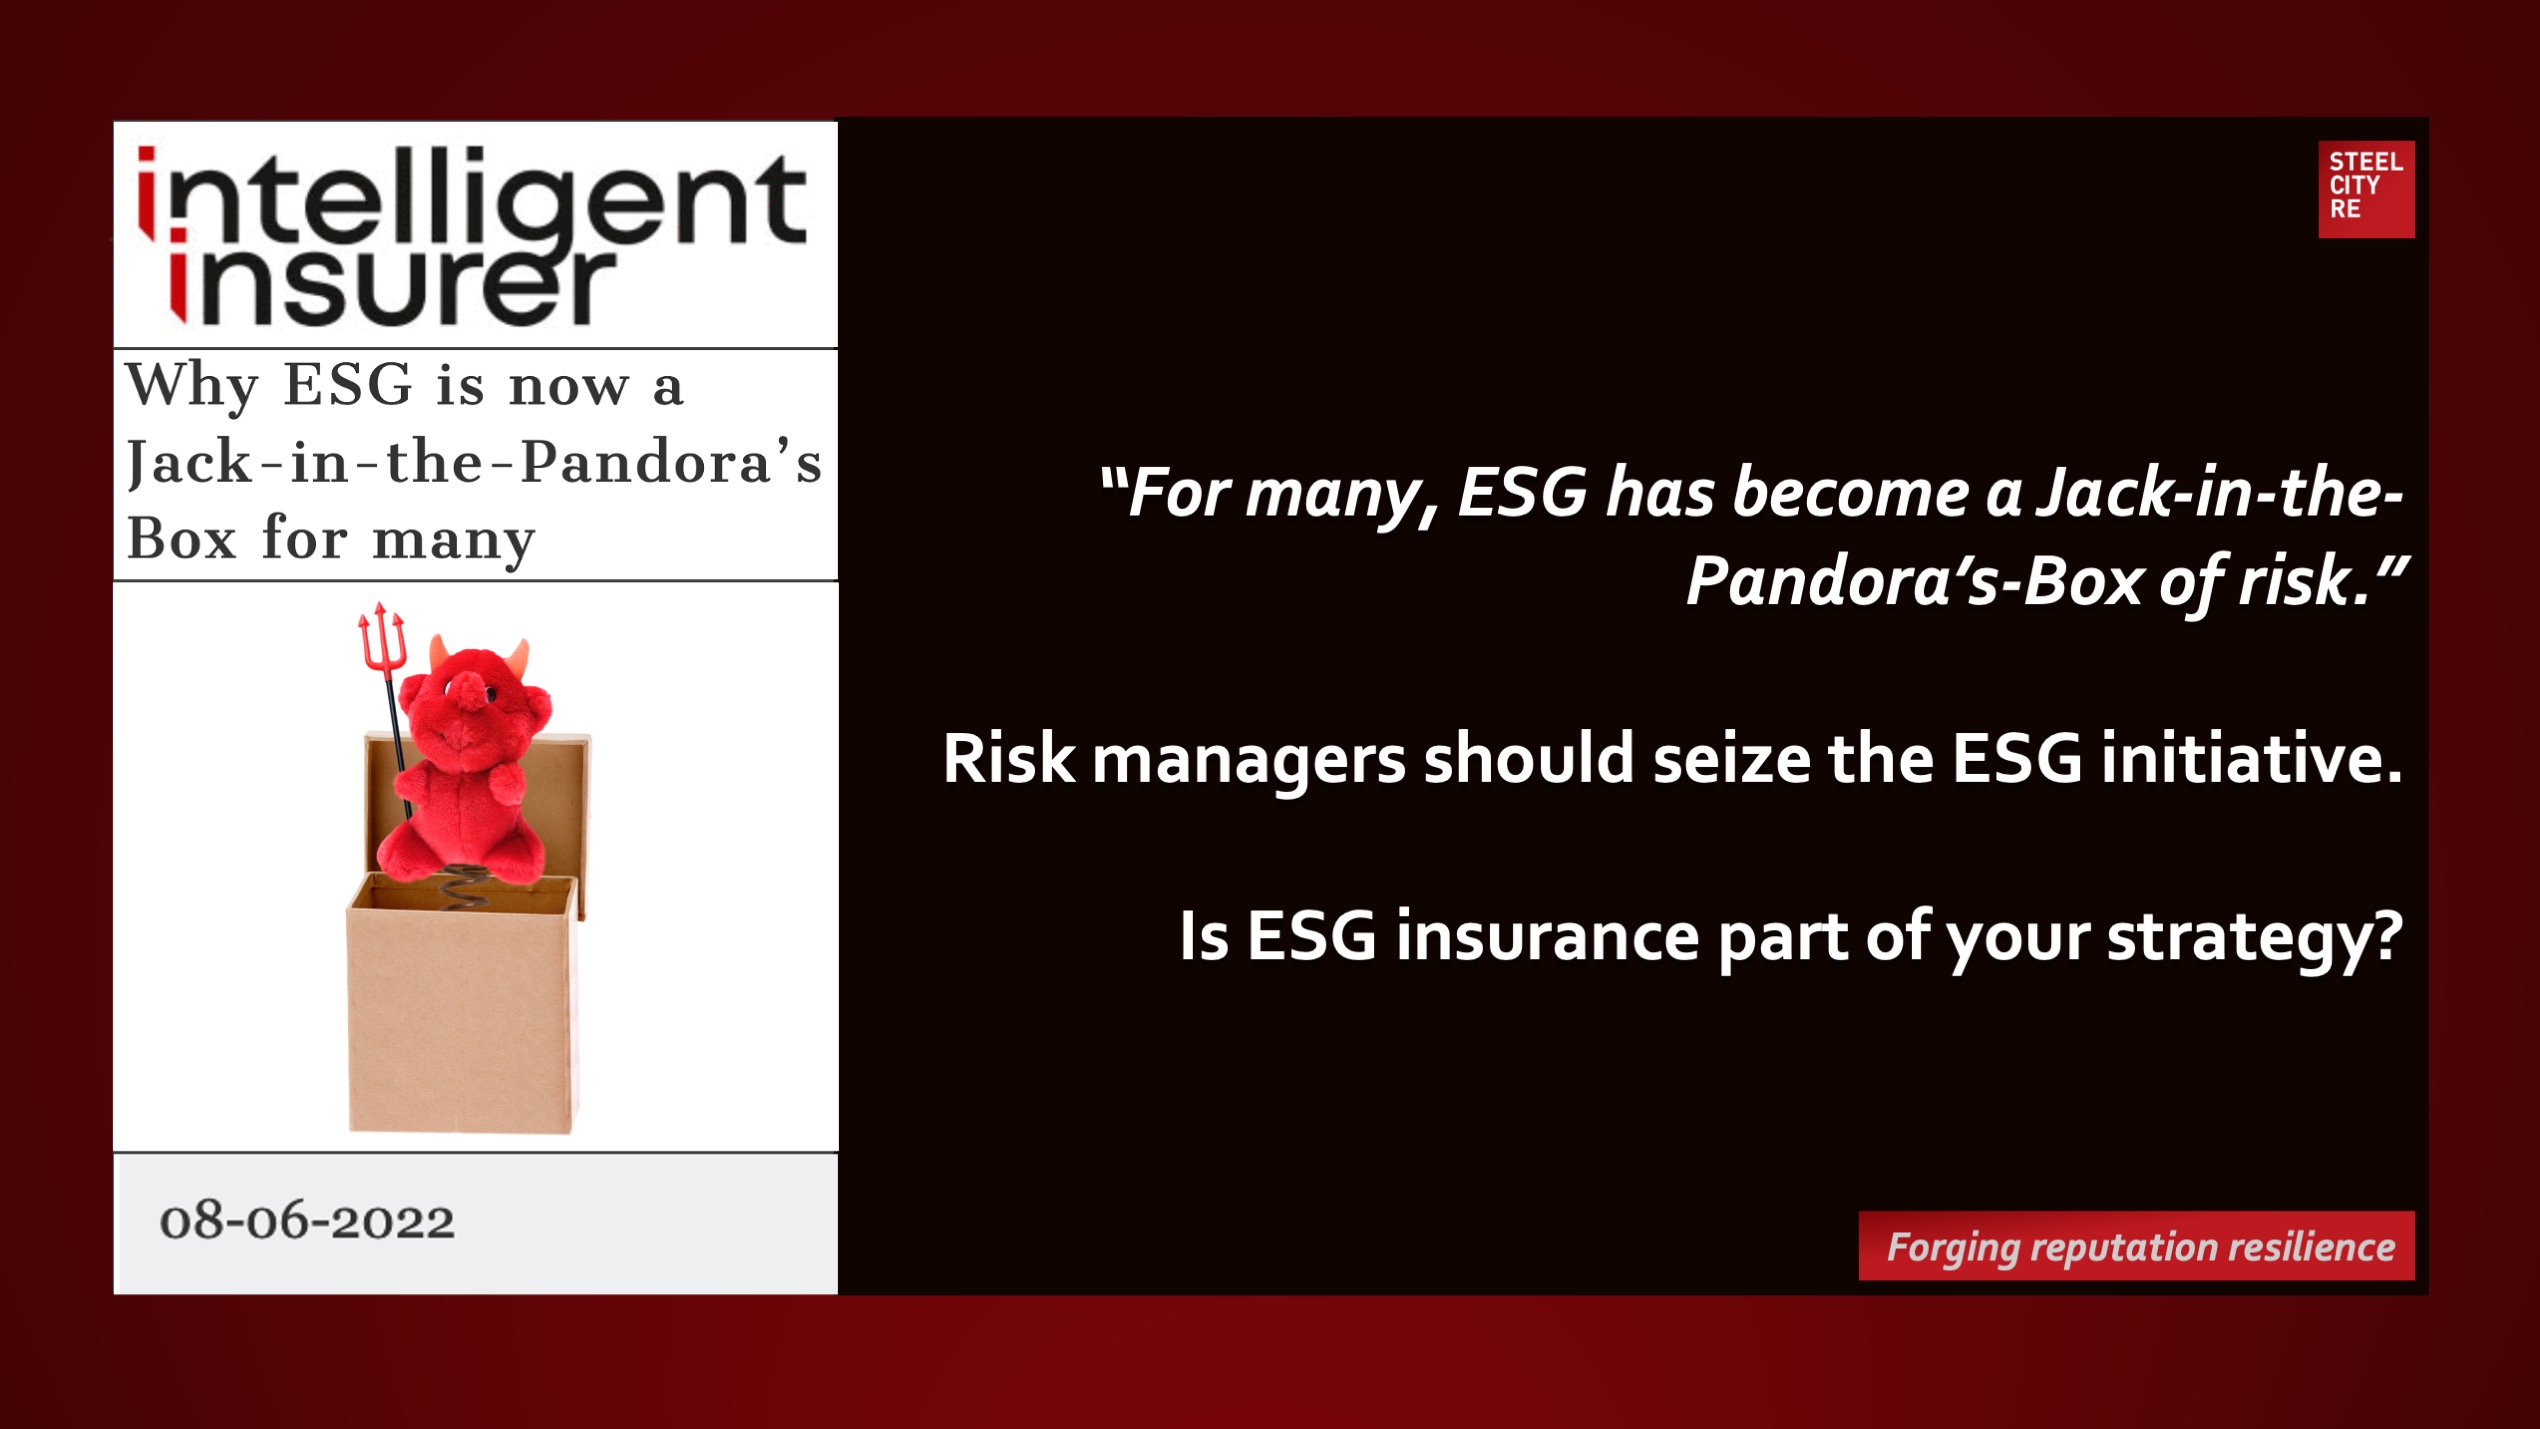 Risk managers should seize the ESG initiative and consider ESG insurance for the new wave of Jack-in-the-Pandora's Box or risks. - Steel City Re